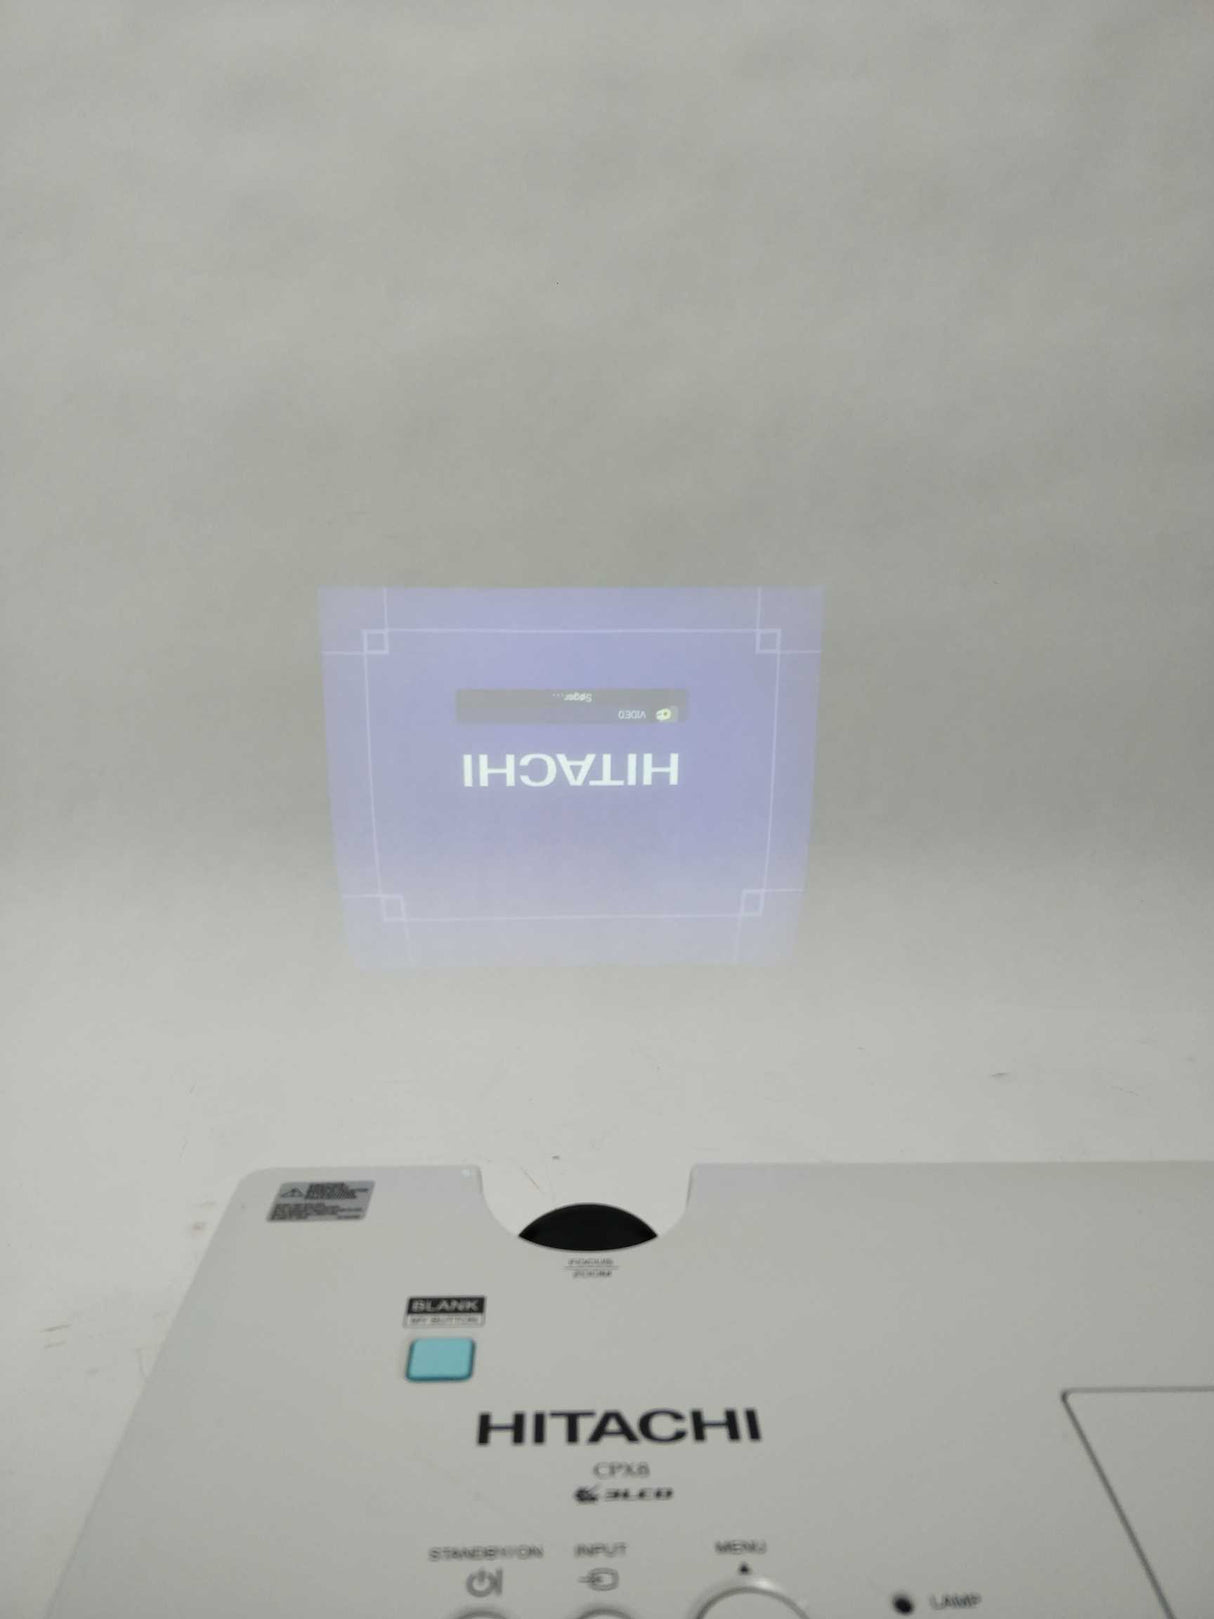 HITACHI CPX8 3LCD Projector